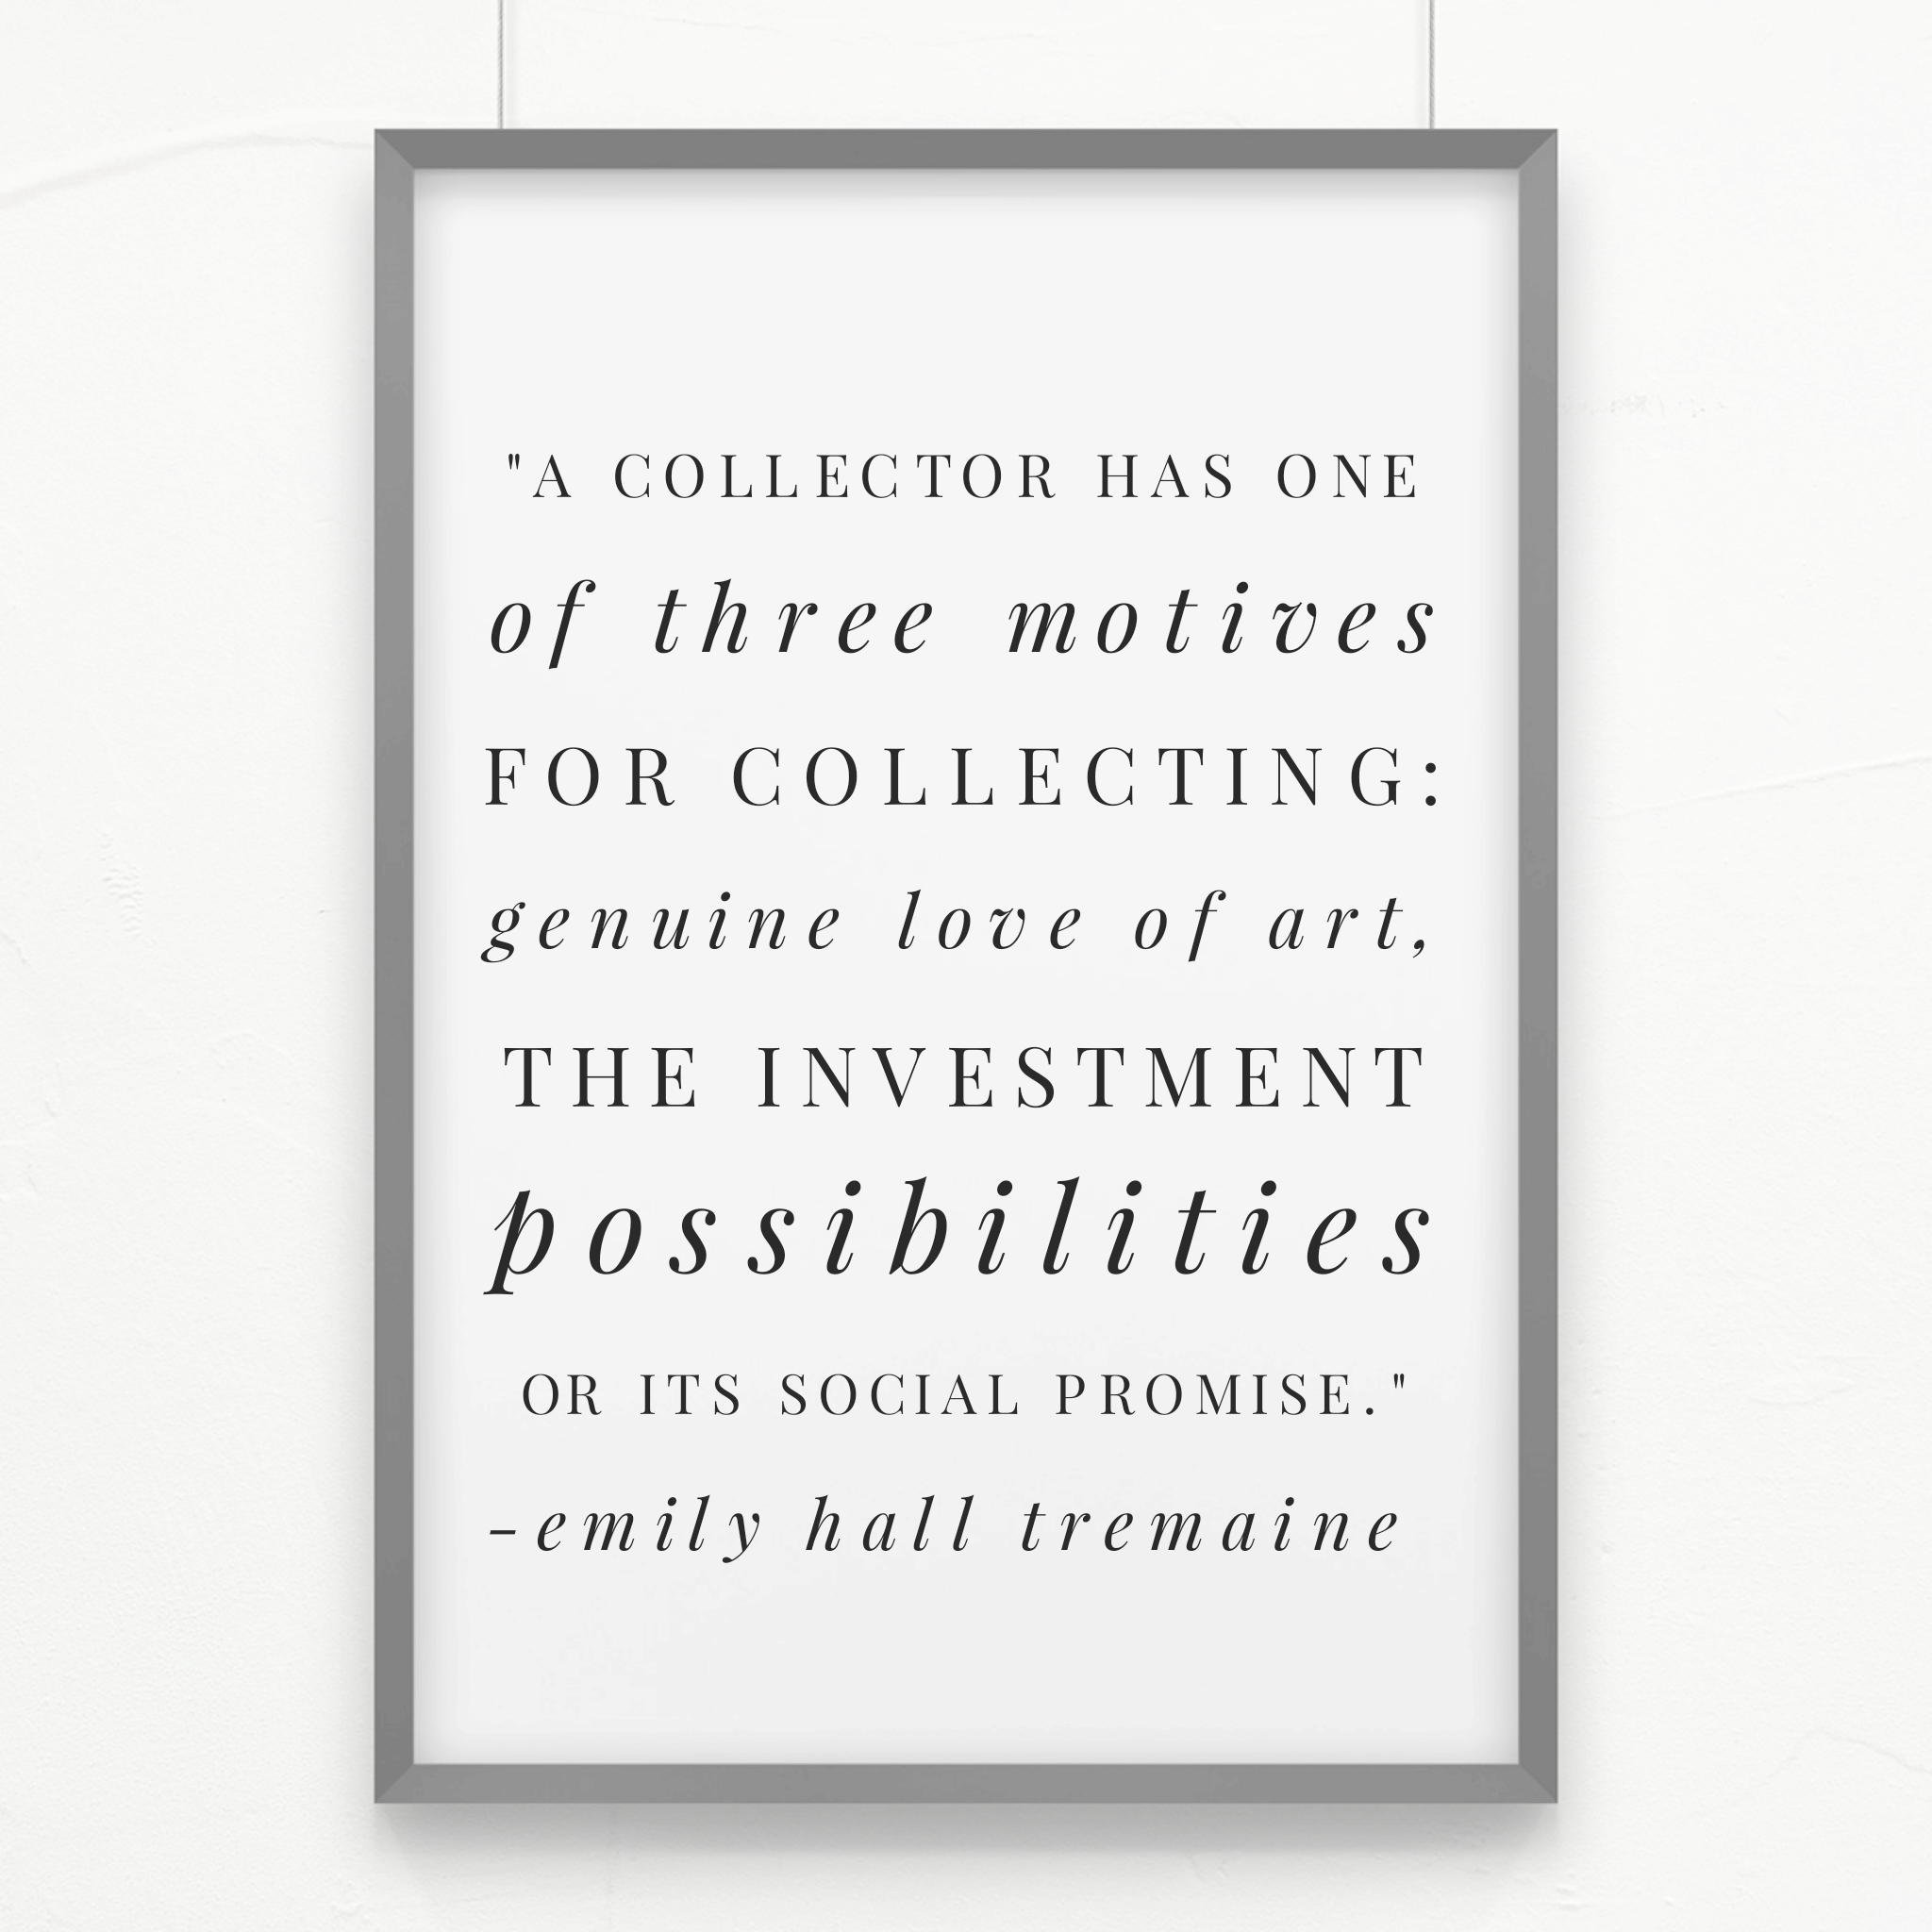 Emily Hall Tremaine quote about art collectors